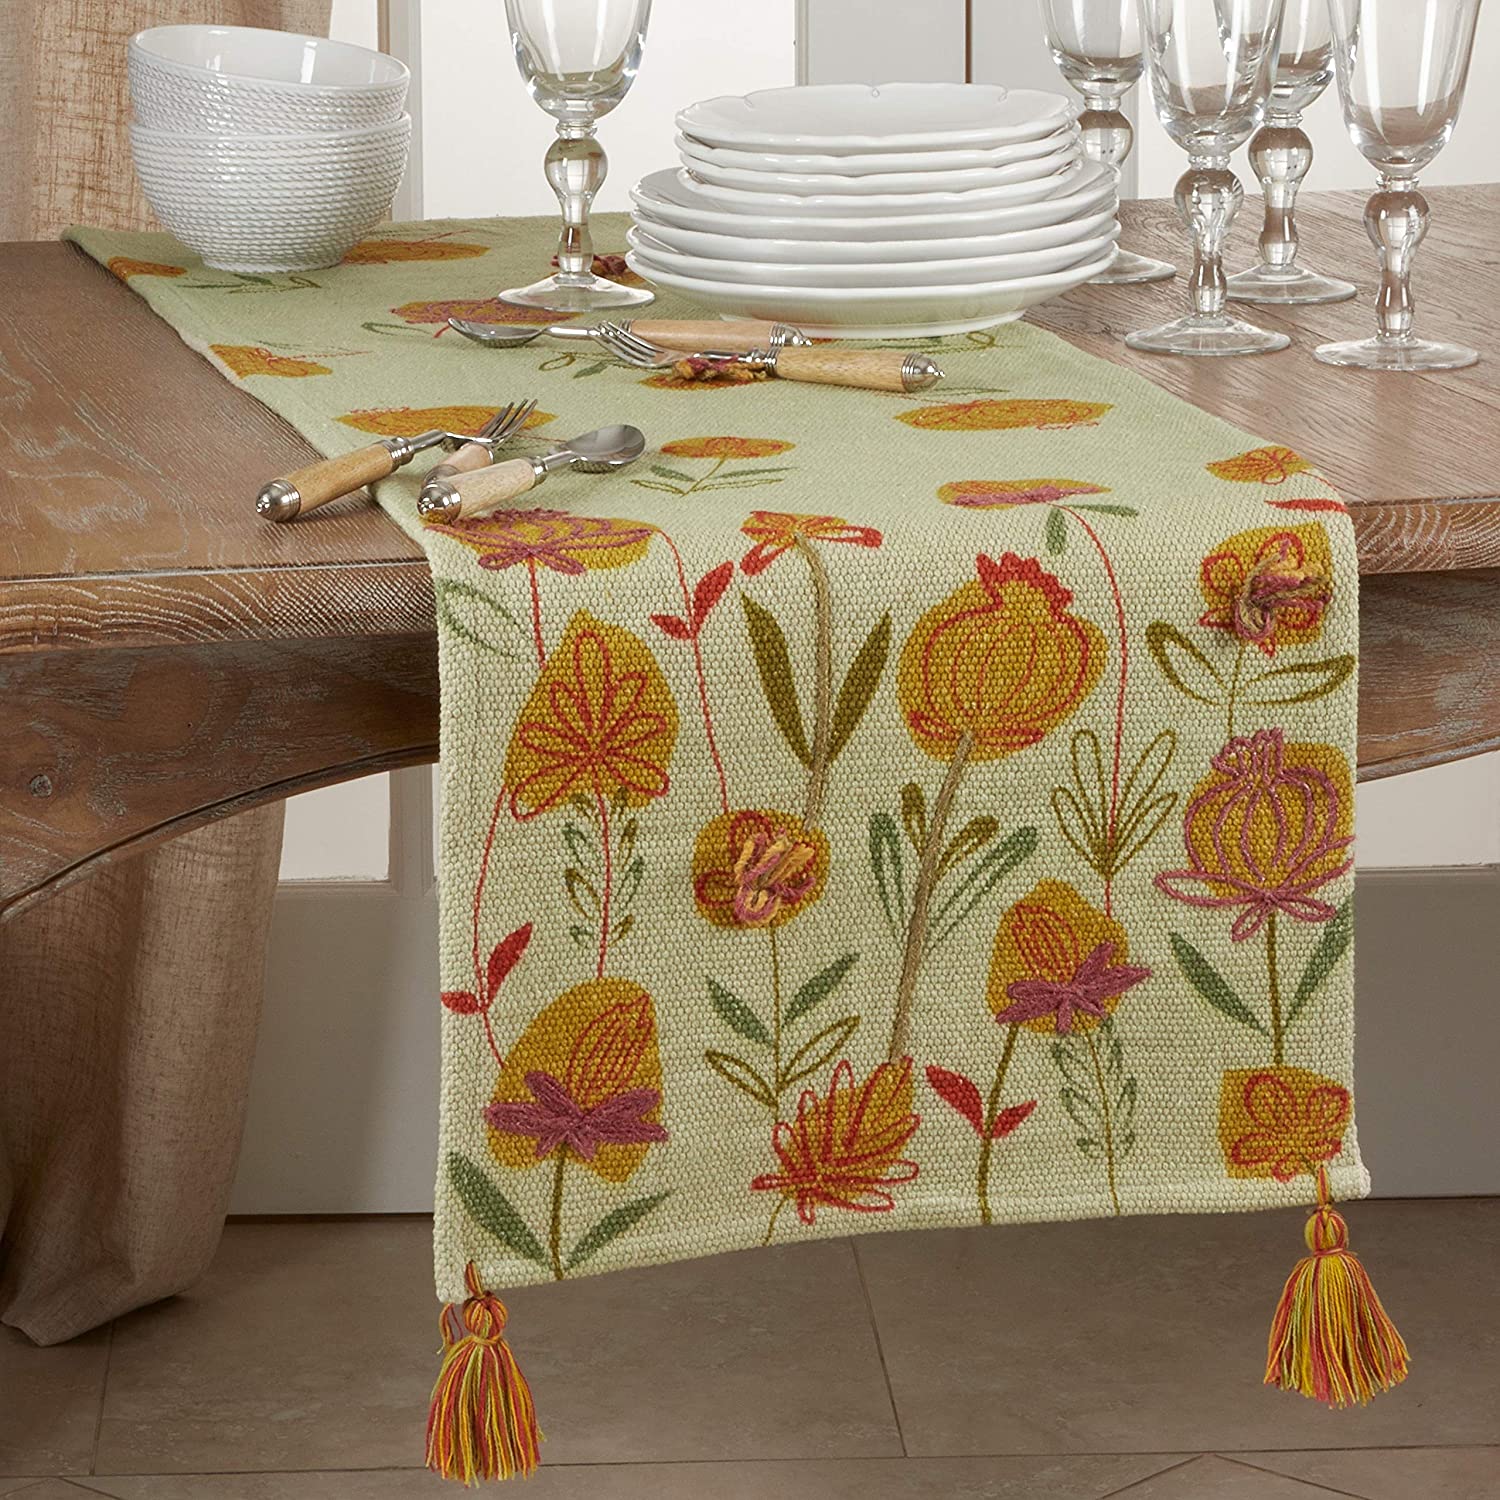 MISC Embroidered Flowers Design Table Runner Green Cotton